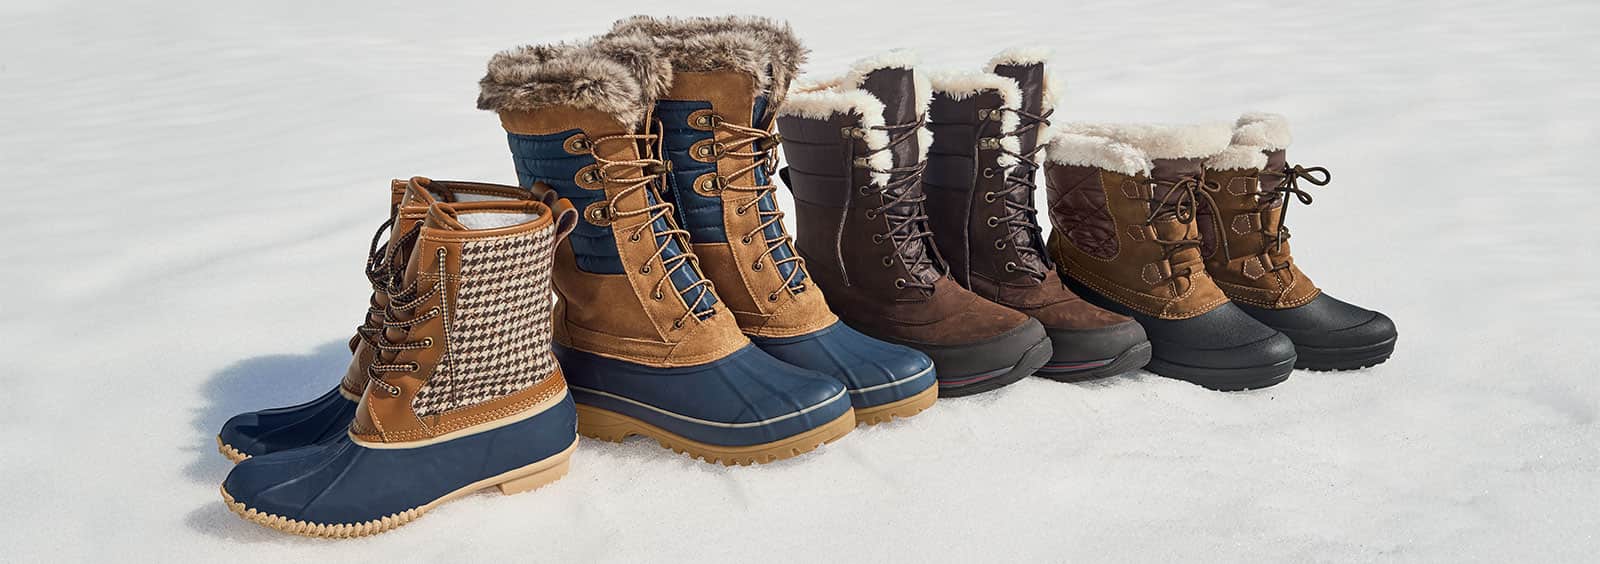 Women's Boots Your Mom Will Love | Lands' End